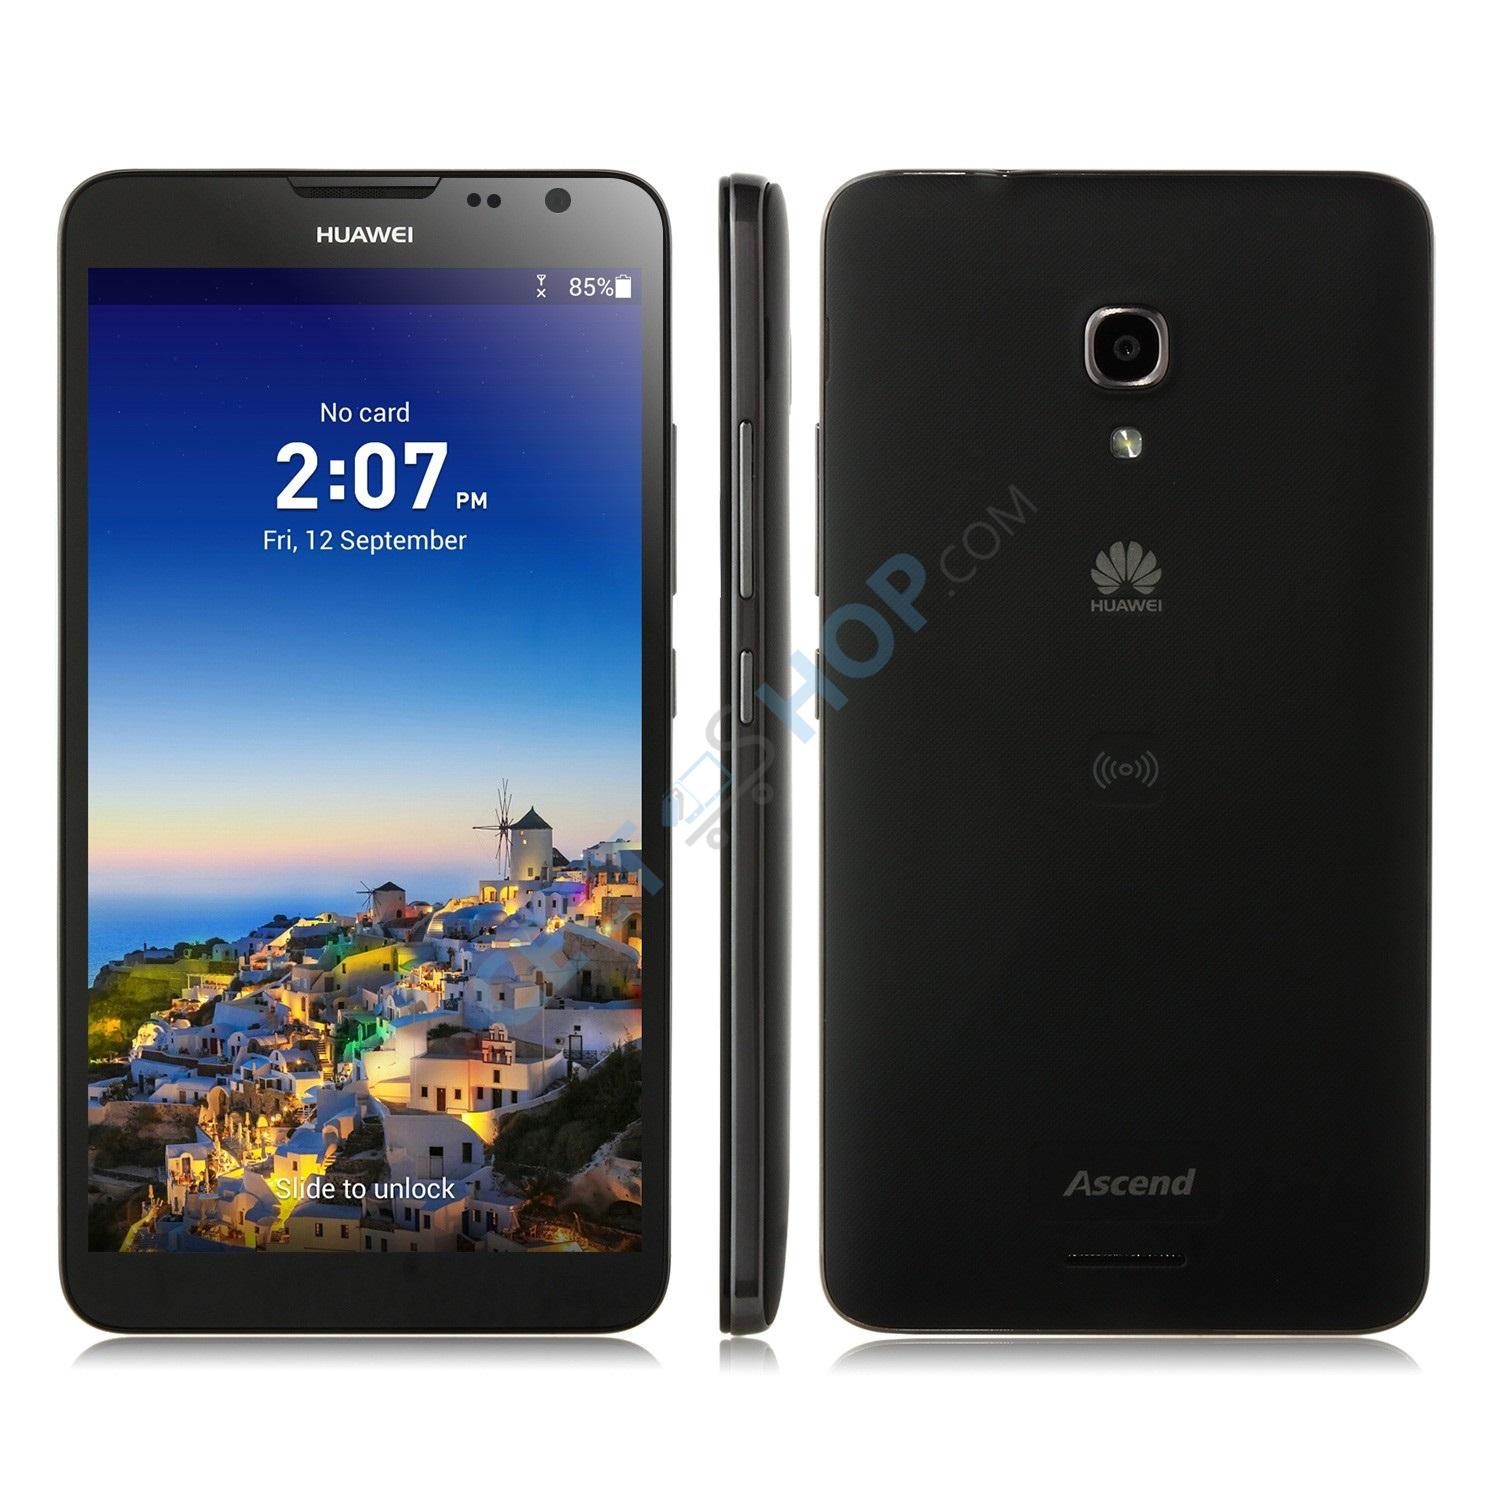 HUAWEI Mate 2 4G 6.1 inch. 2GB RAM 16GB ROM HiSilicon Kirin 910 Quad Core 1.6GHz Android